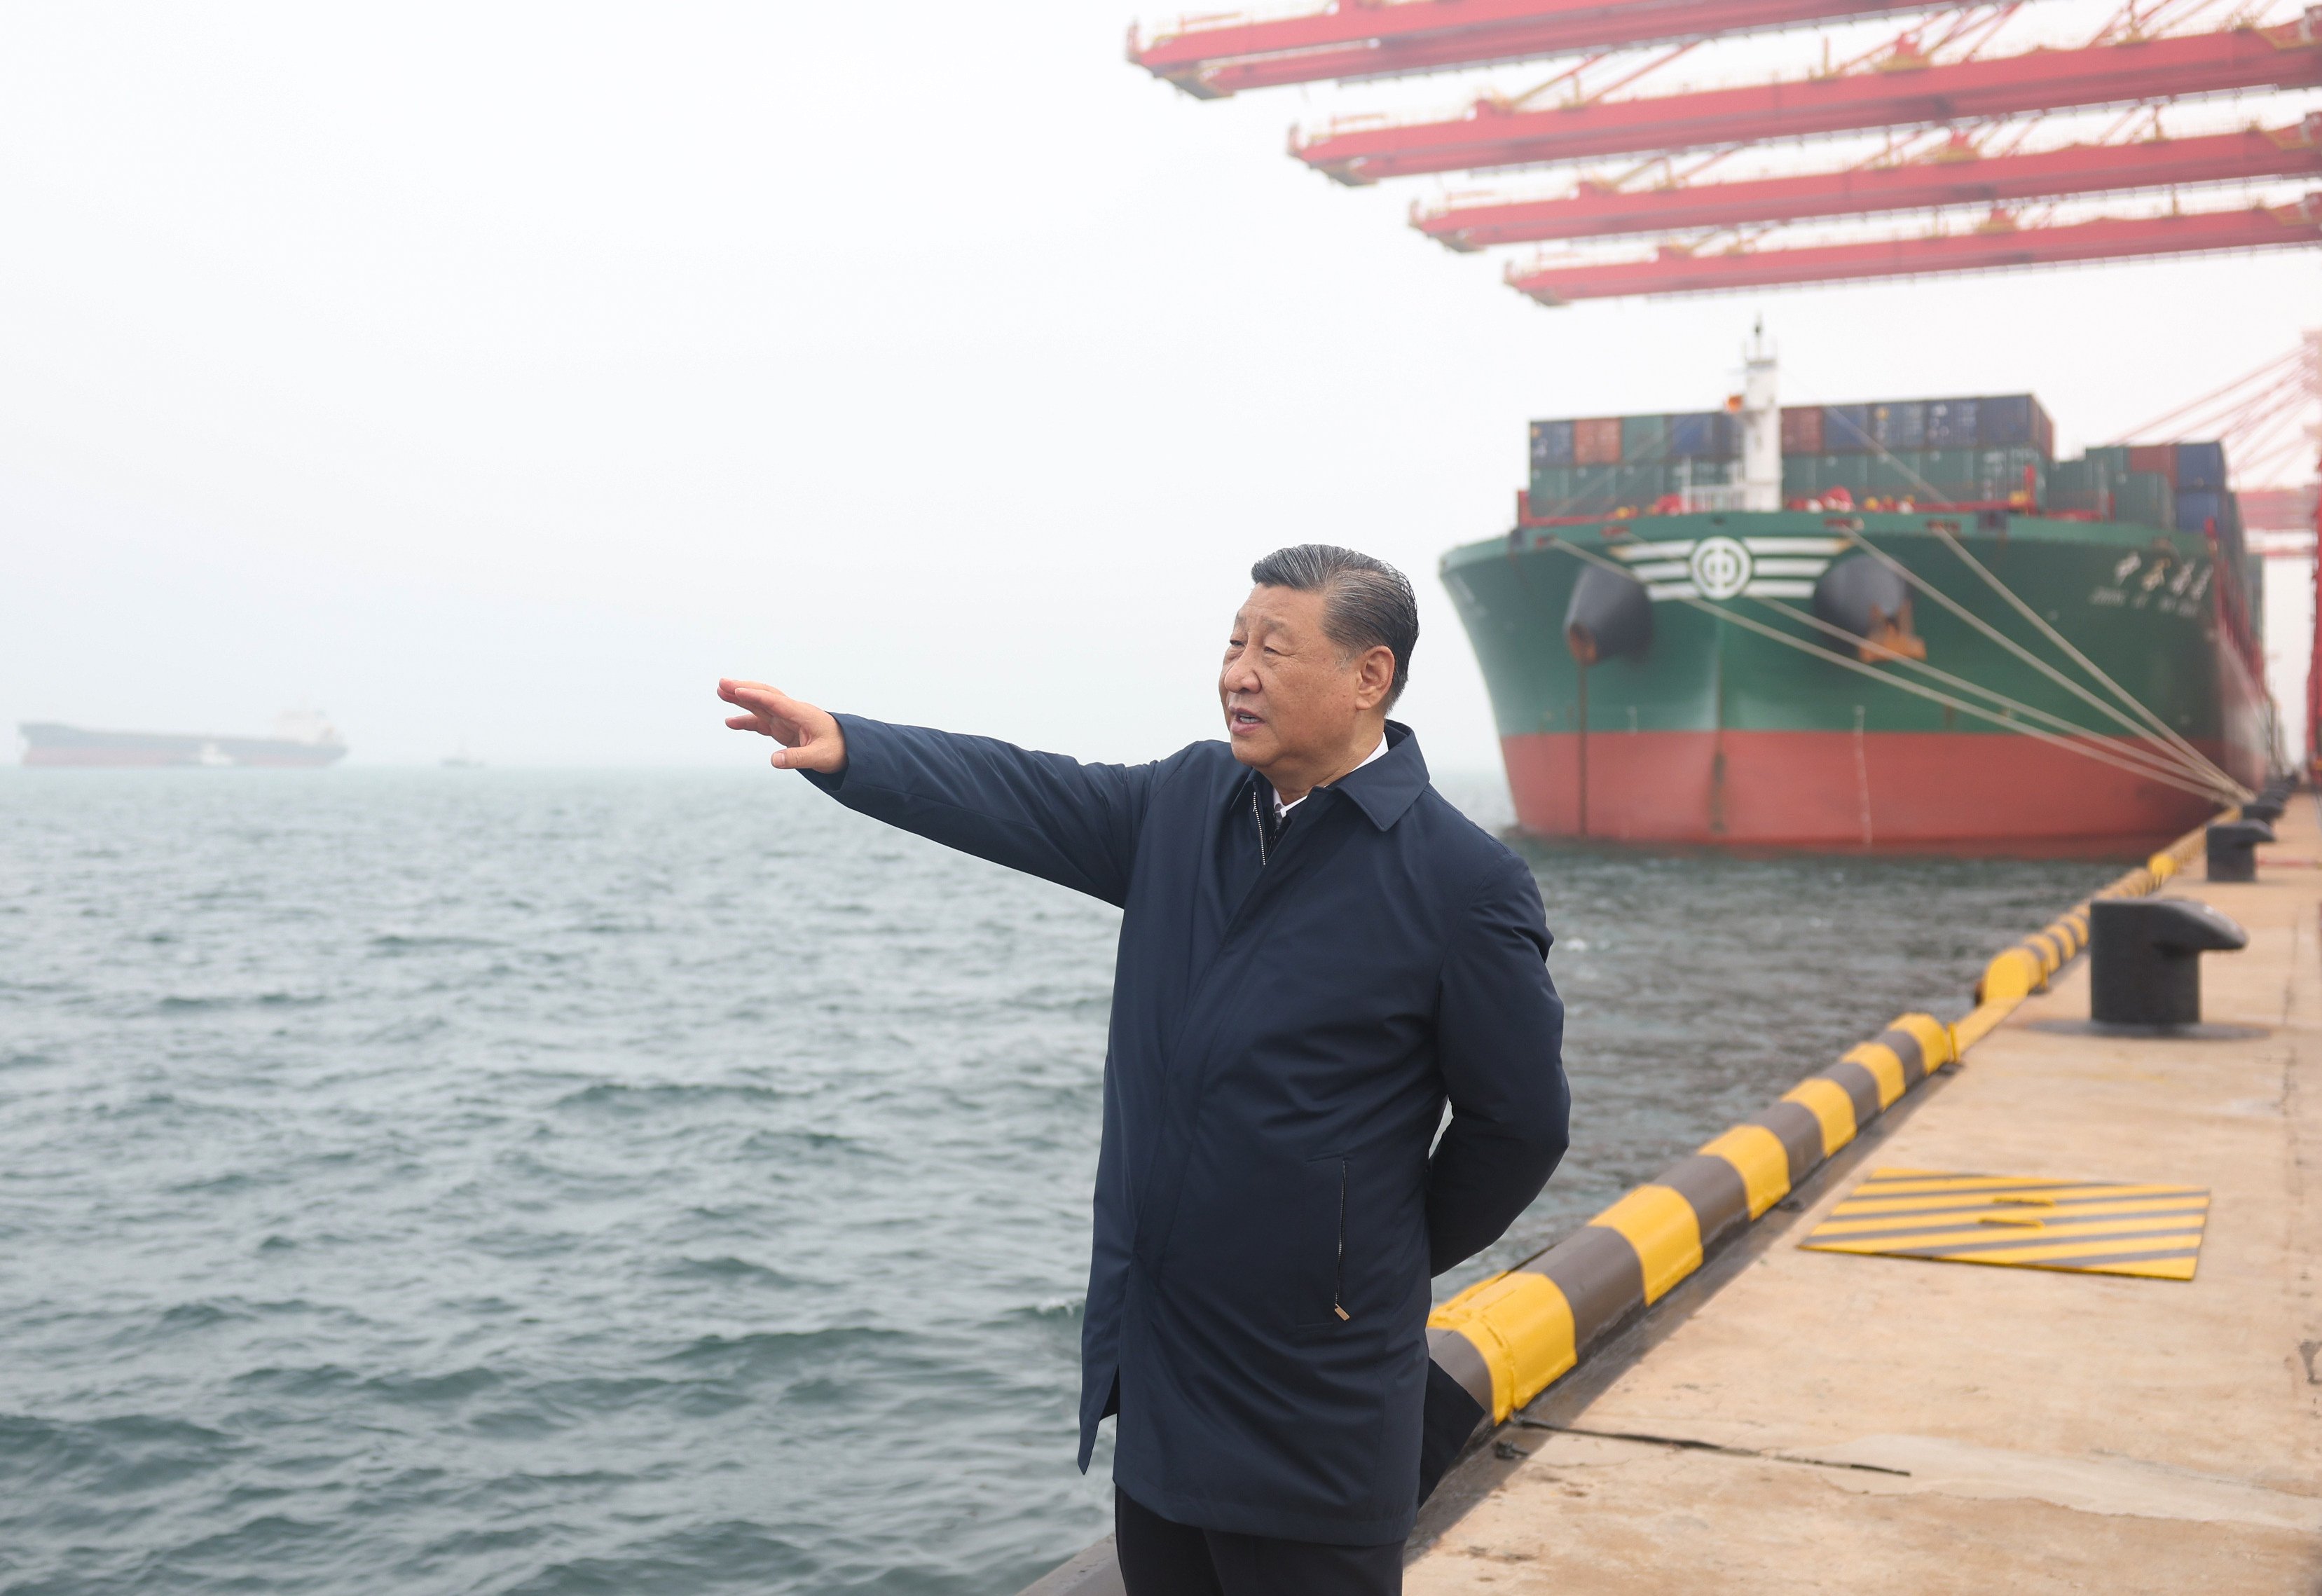 President Xi Jinping visits Rizhao Port in Shandong province on Thursday. He also stopped in Jinan, meeting business leaders there. Photo: Xinhua